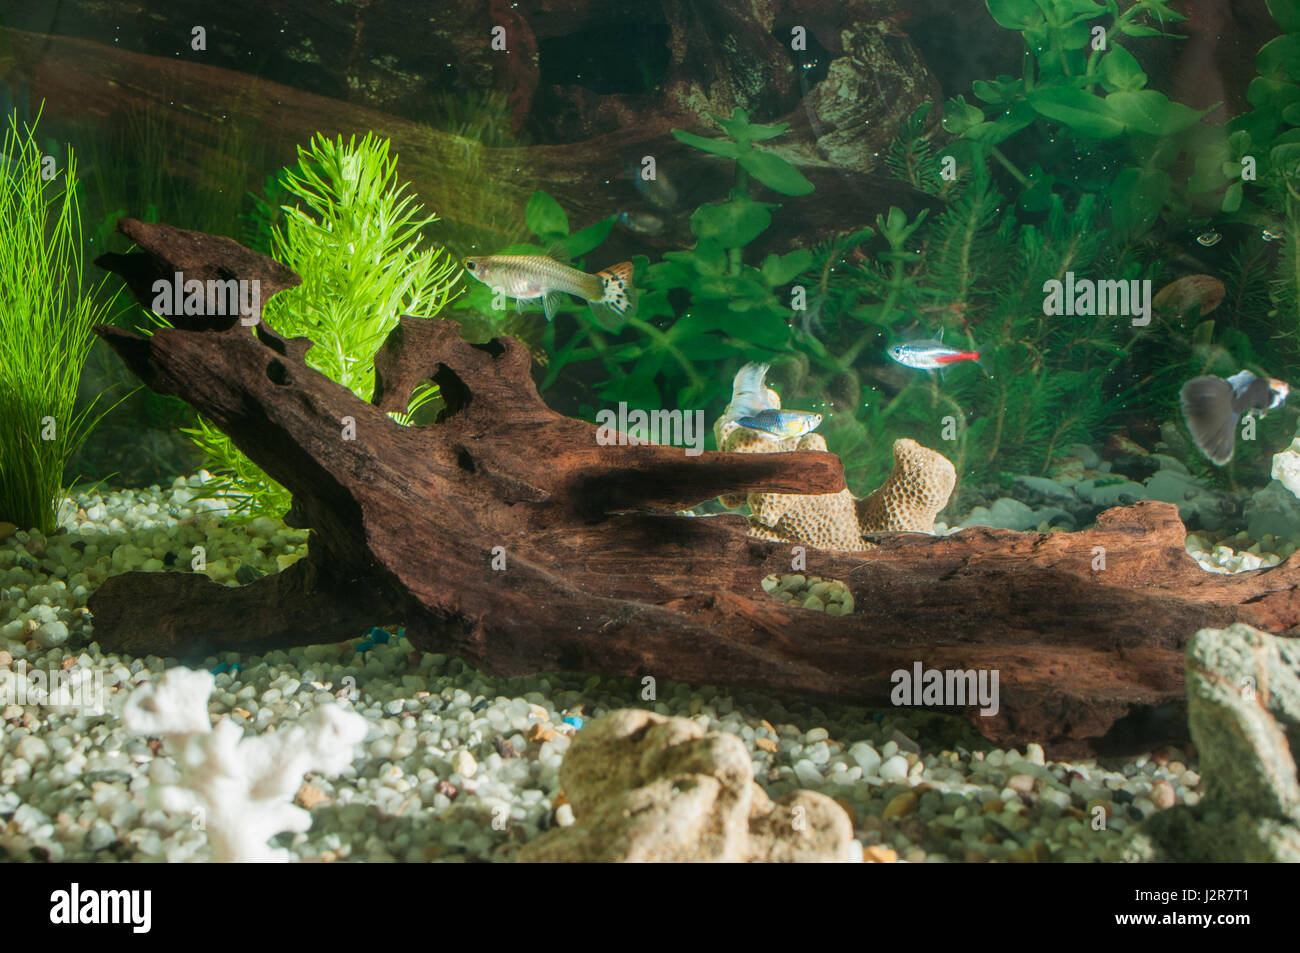 aquarium with many fish and natural plants and sand.Tropical fishes.aquarium with green plants and corals Stock Photo